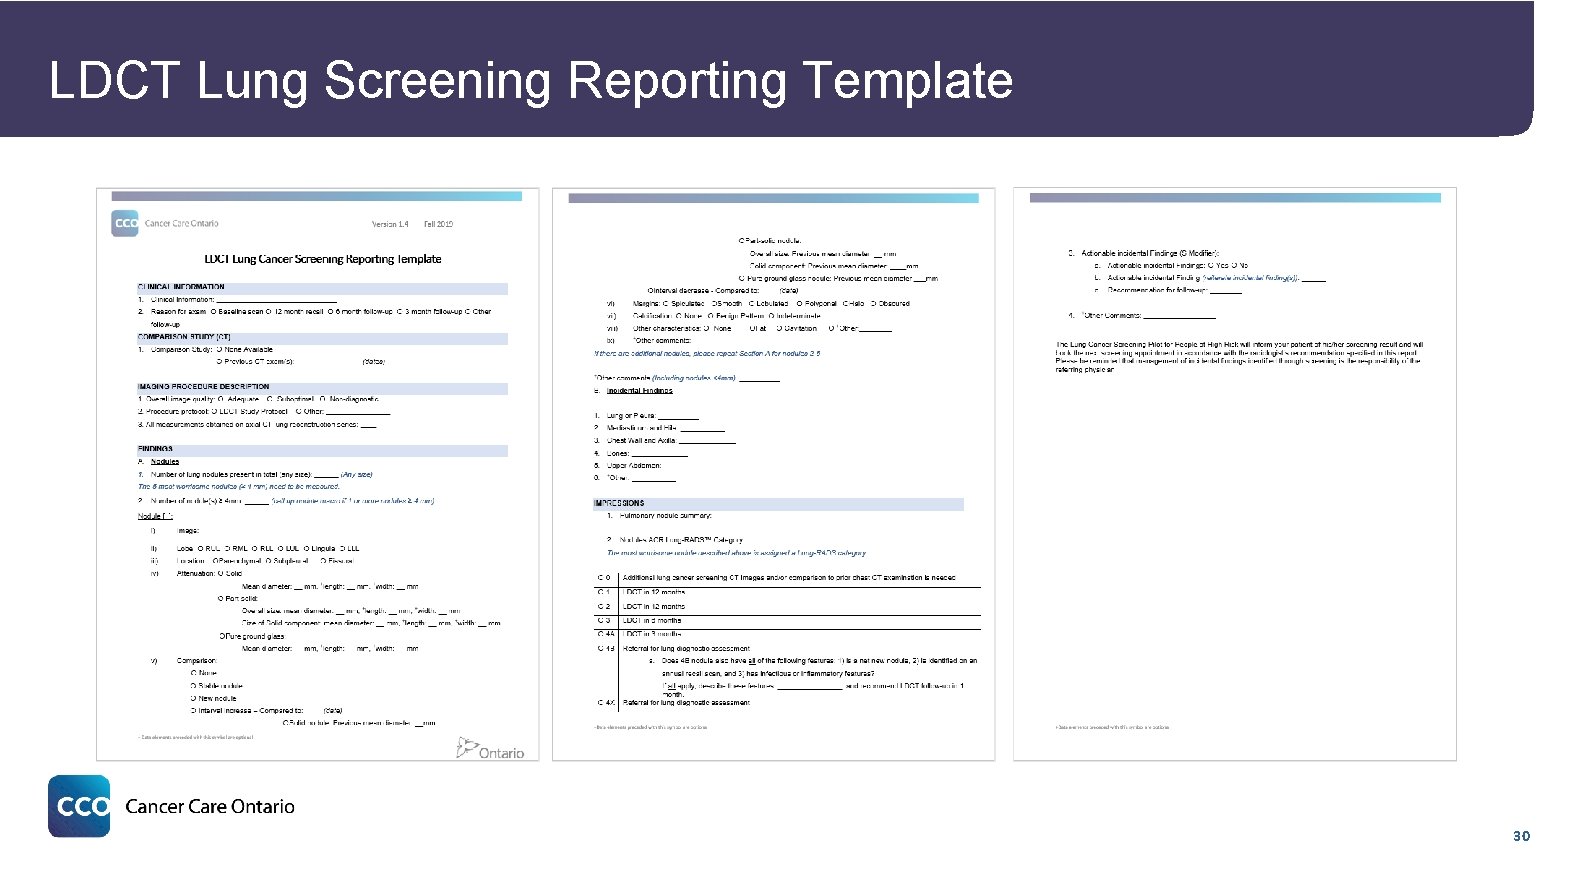 LDCT Lung Screening Reporting Template 30 